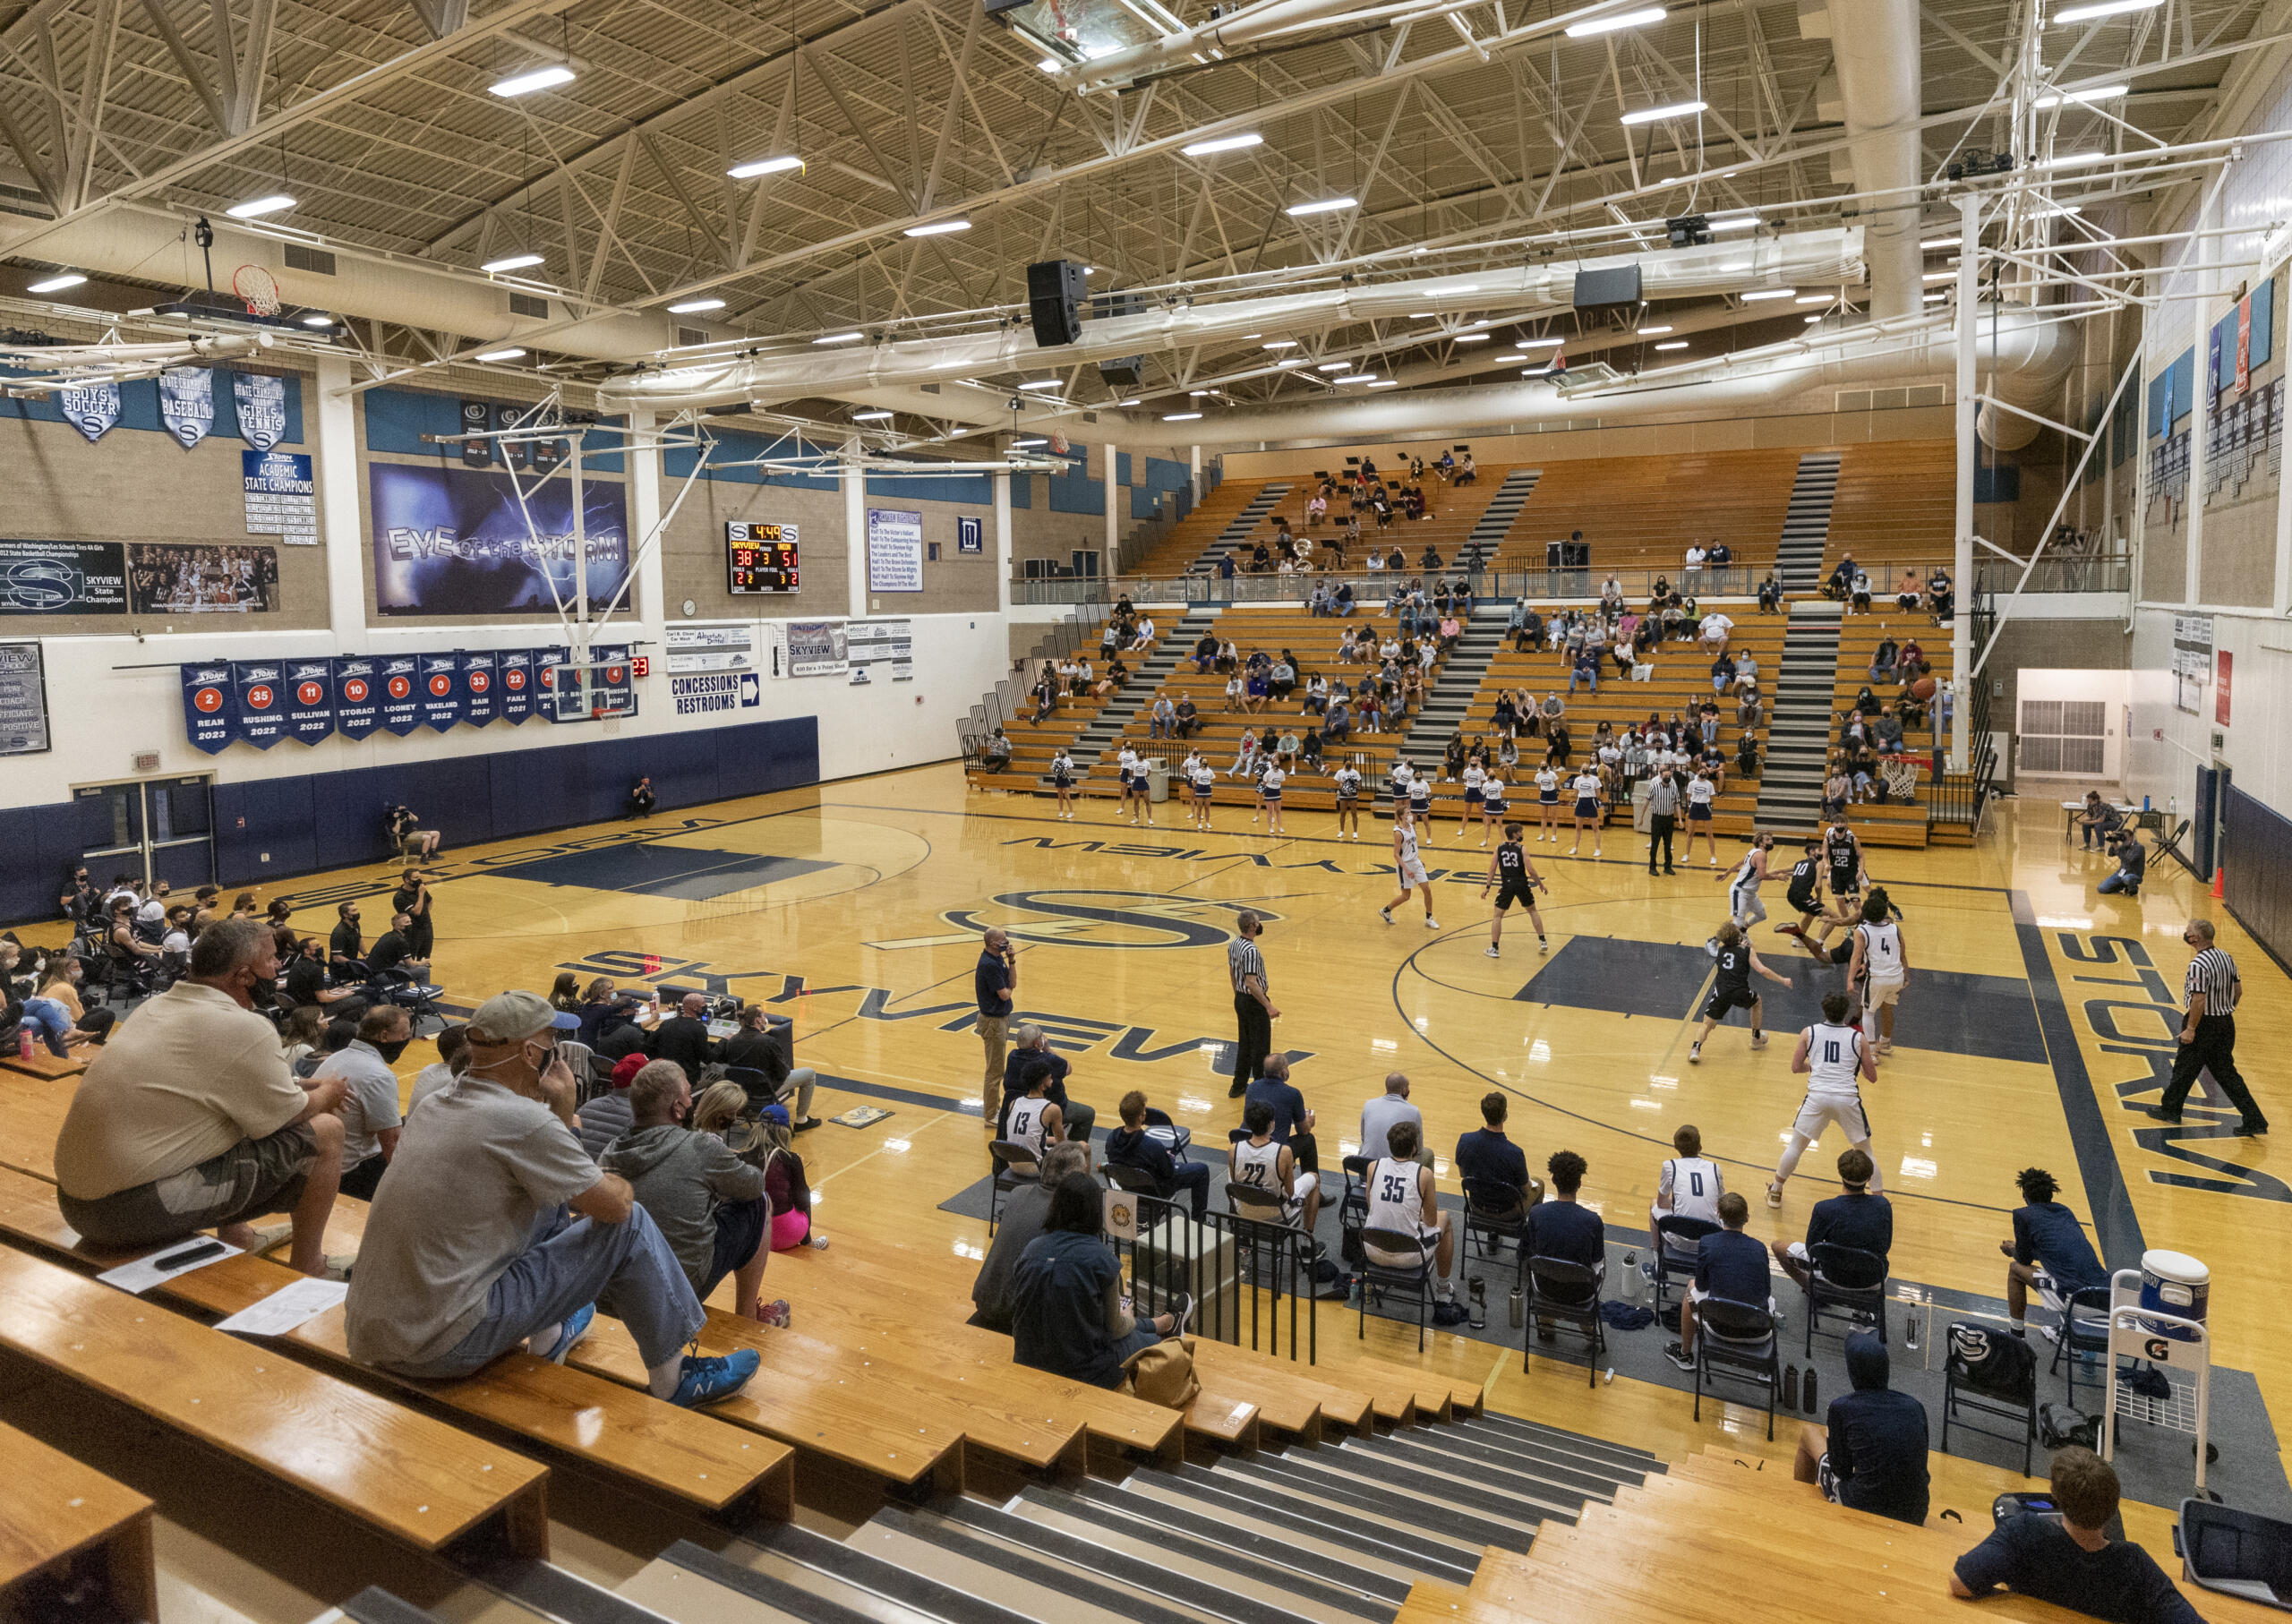 Fans watch the basketball game between Skyview and Union on Tuesday, April 27, 2021, at Skyview High School.(Taylor Balkom/for The Columbian)